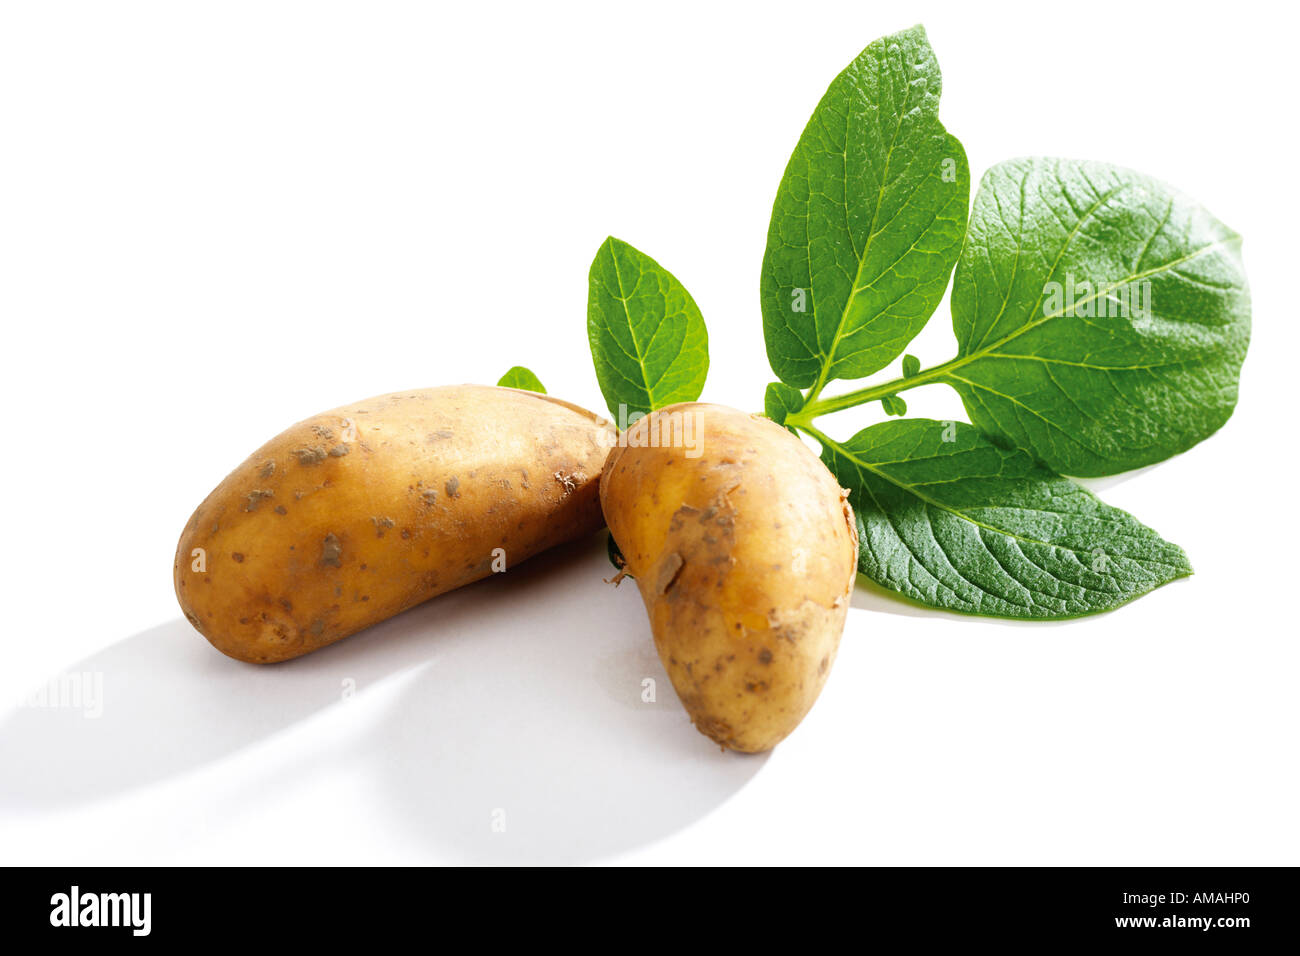 Patatoes with leaves Stock Photo